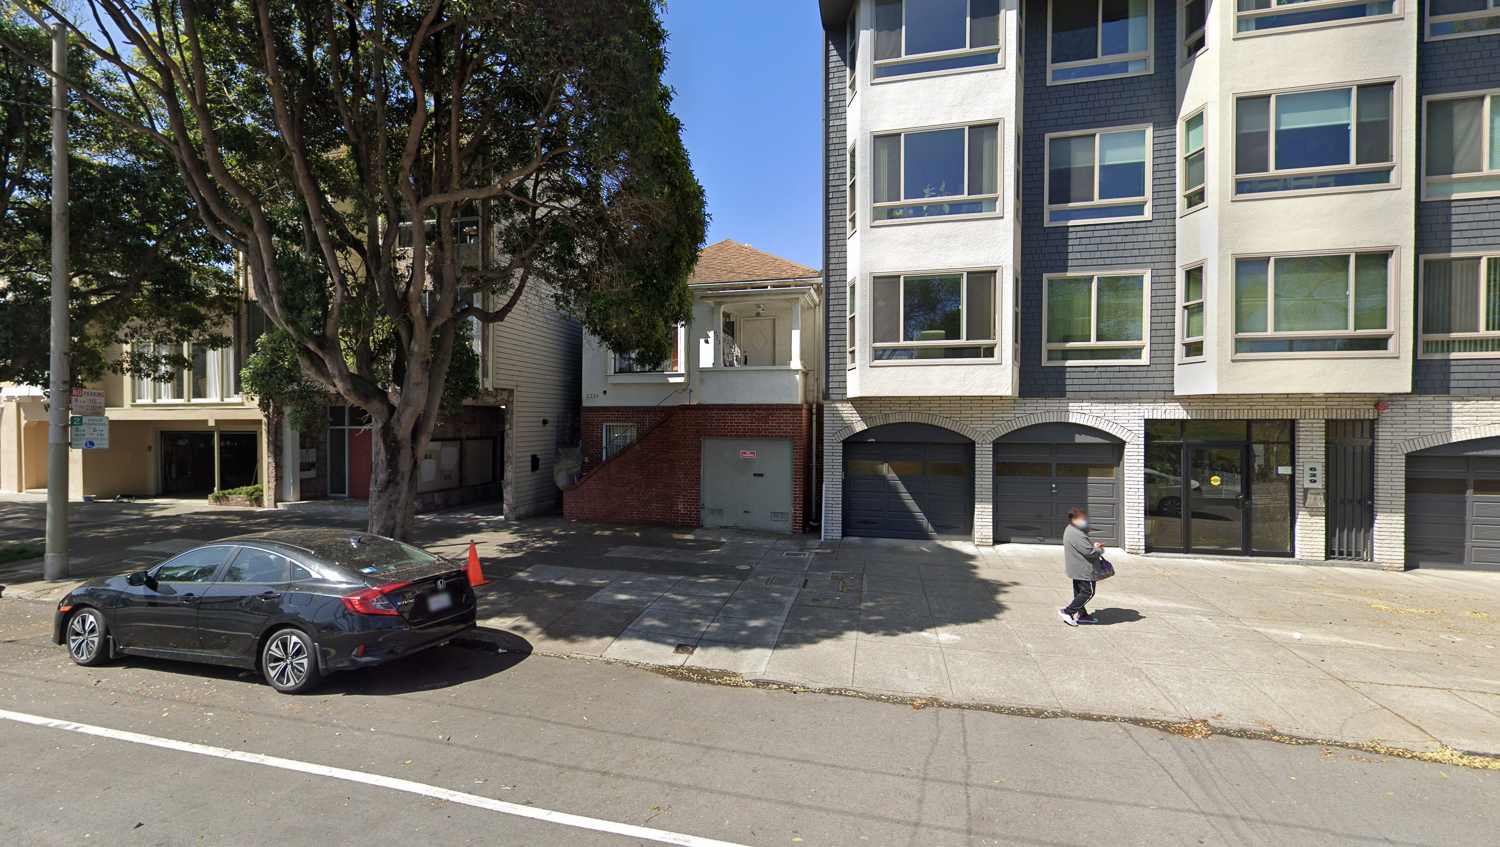 633 Arguello Boulevard existing condition, image by Google Street View